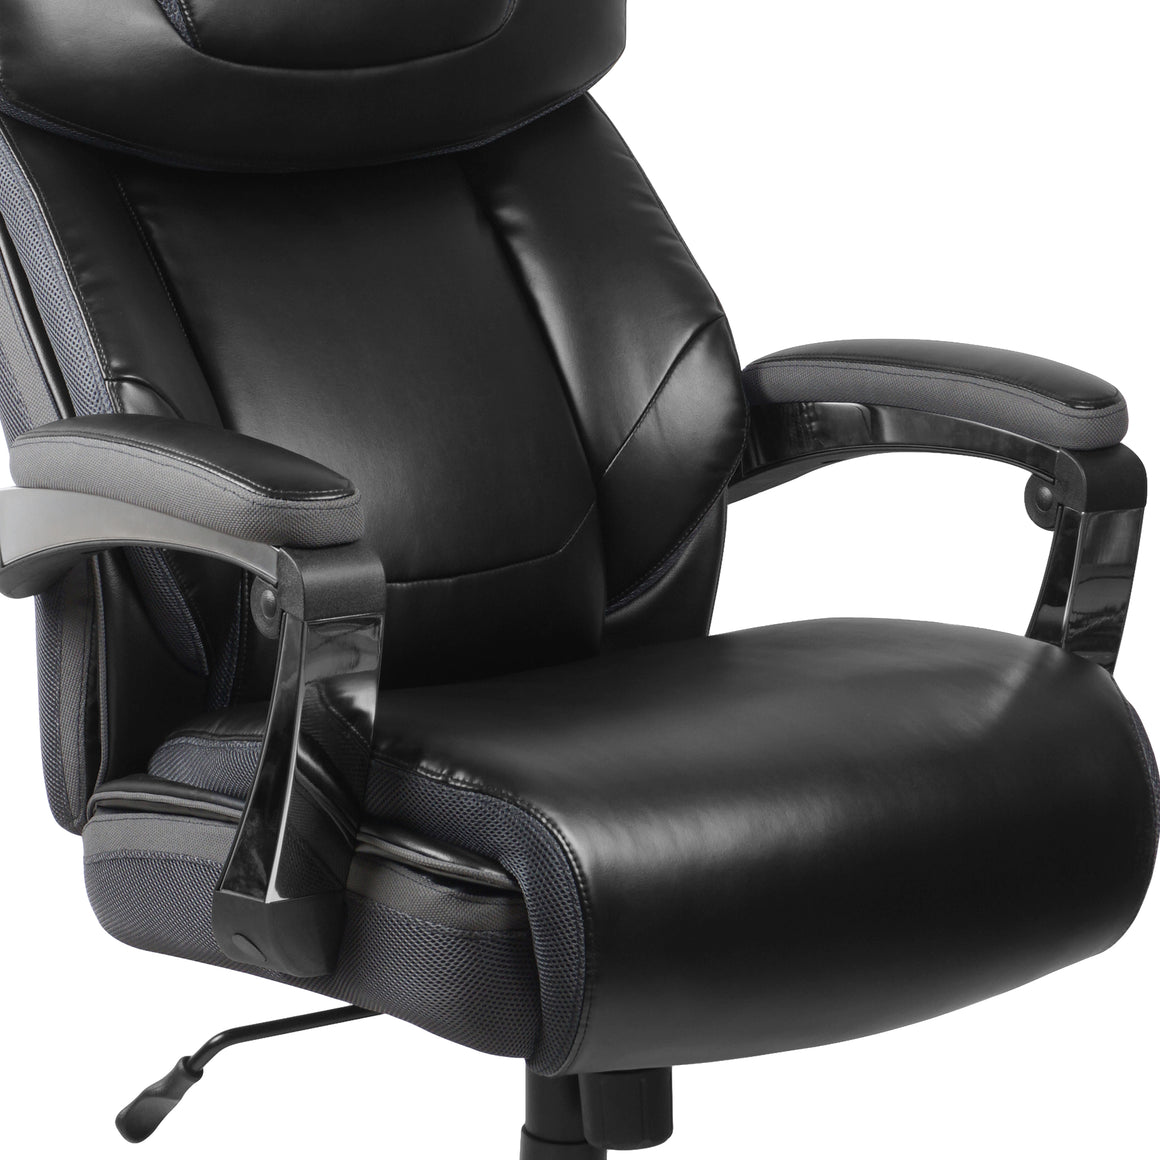 Hercules 500 Lb. Capacity Big & Tall Black Leather Executive Chair - Man Cave Boutique